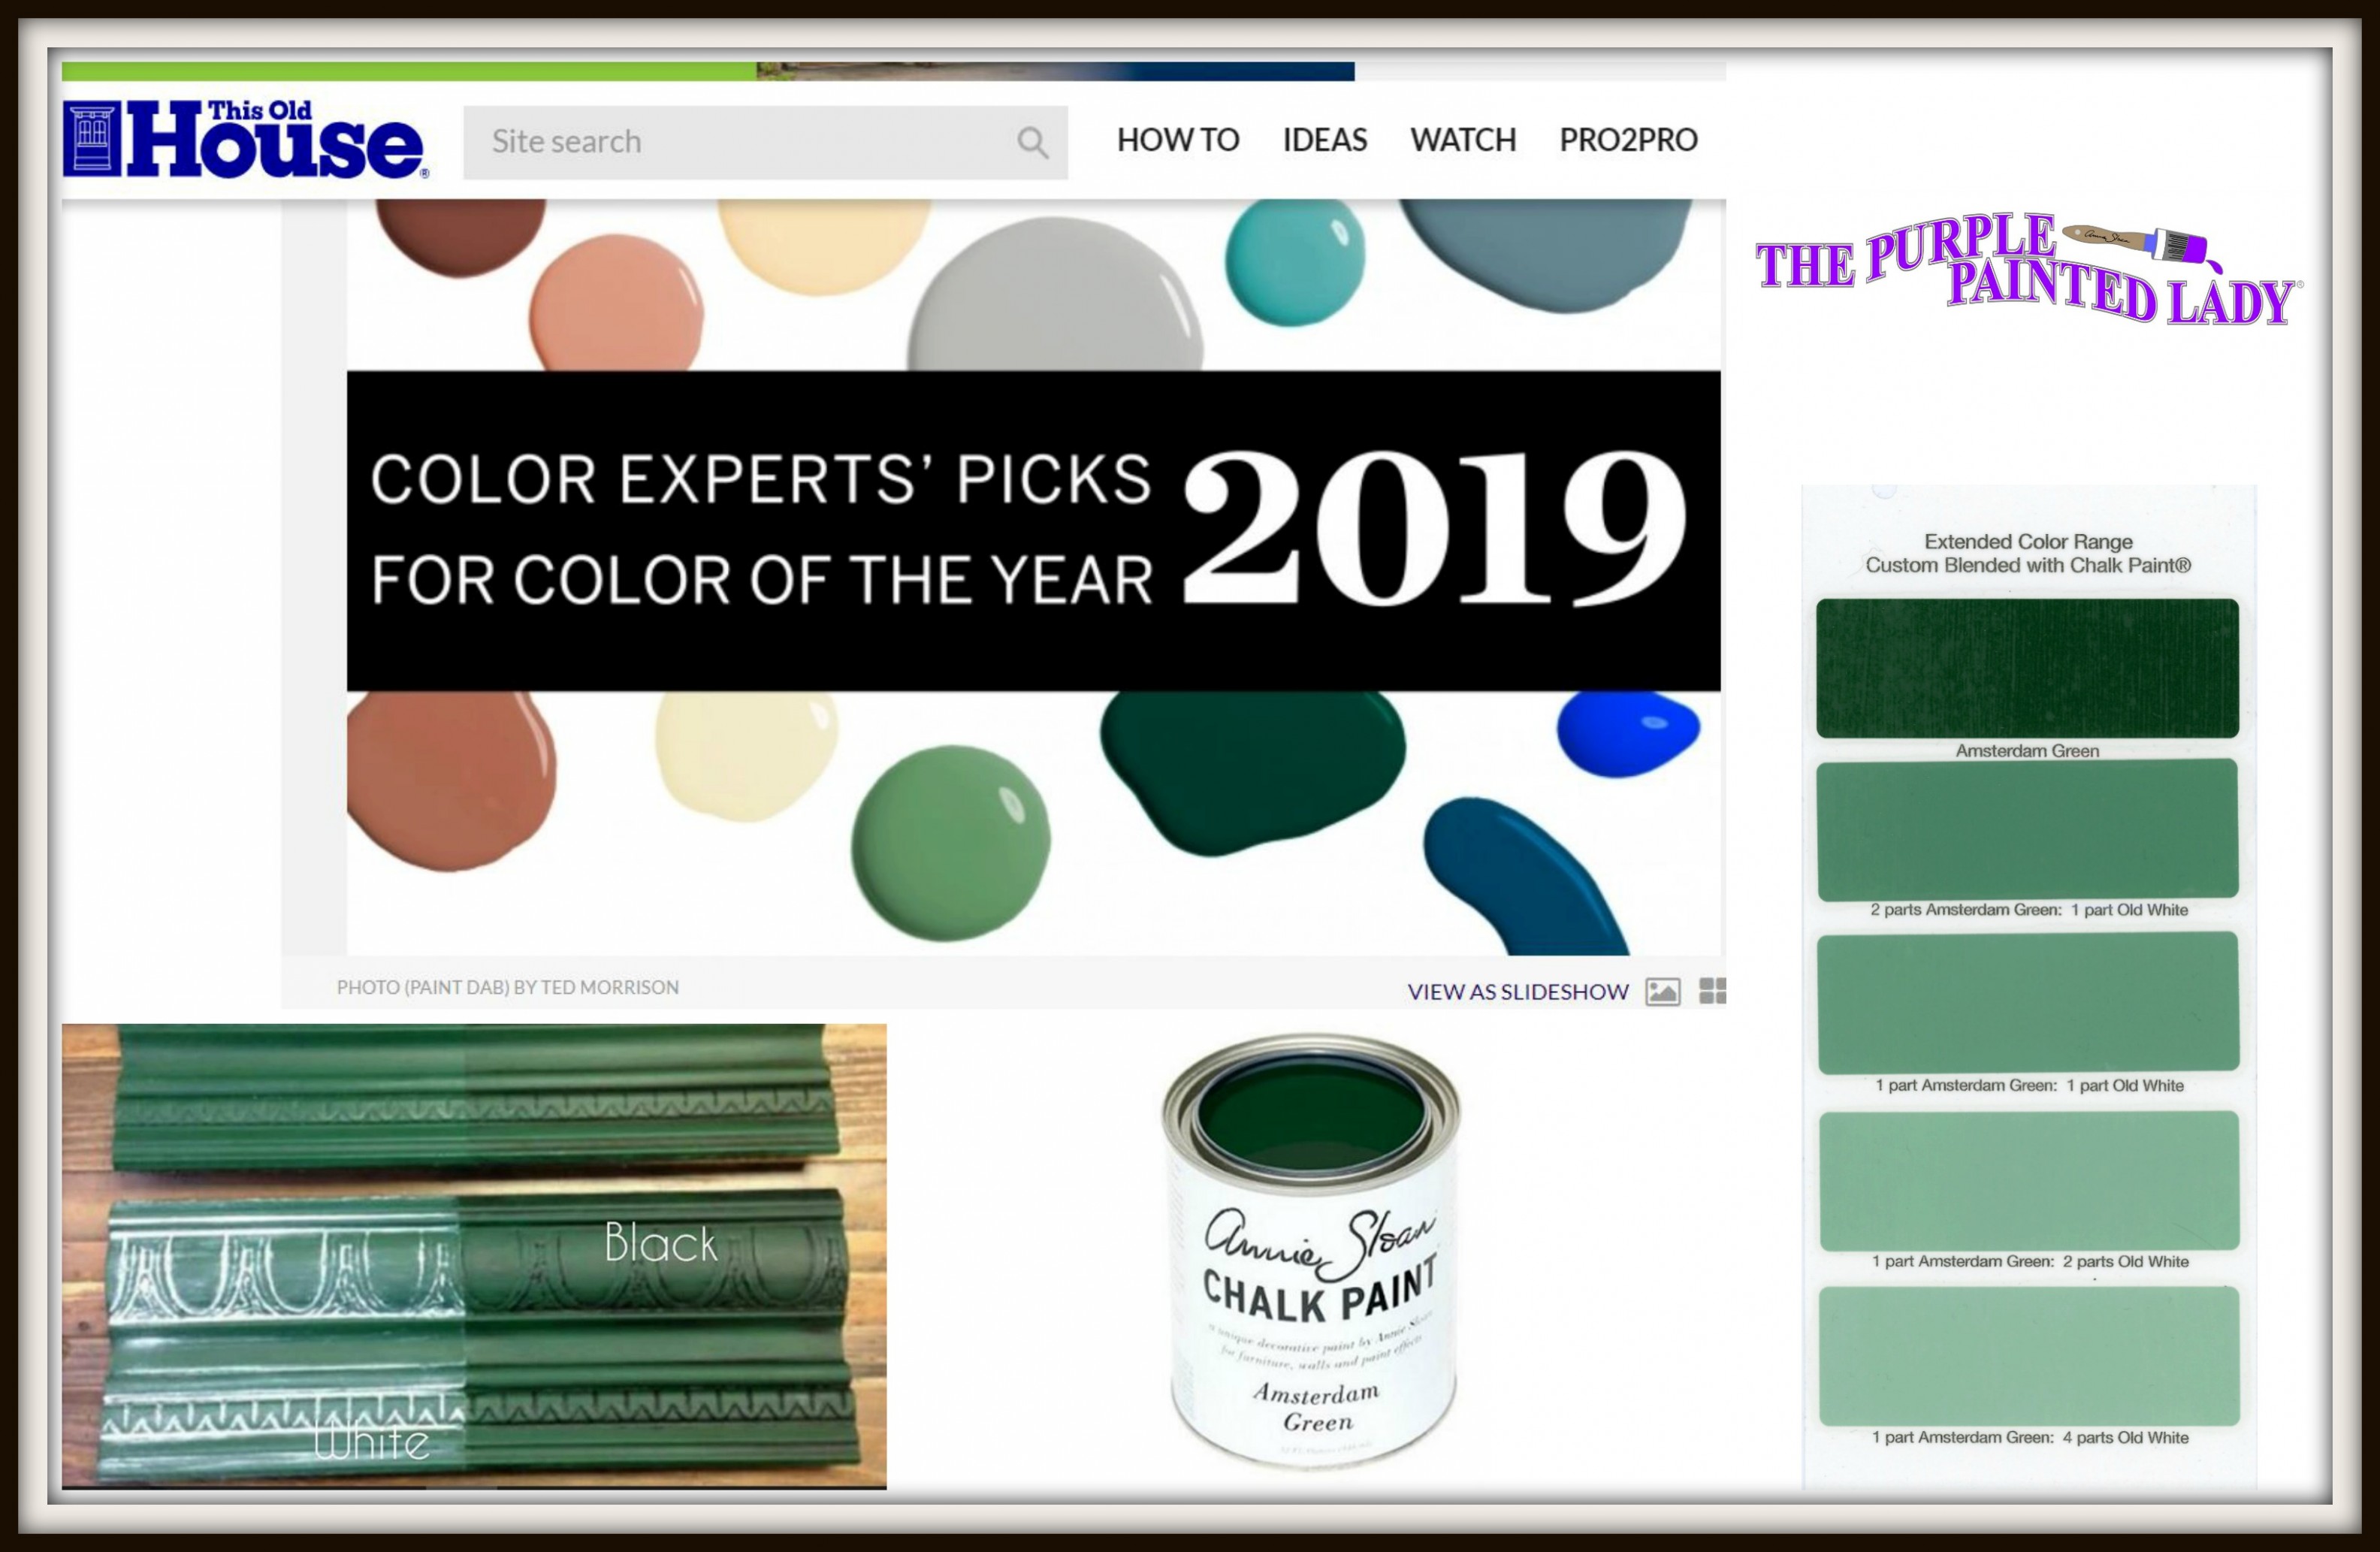 Amsterdam Green | The Purple Painted Lady Annie Sloan Chalk Paint Colors Old Ochre